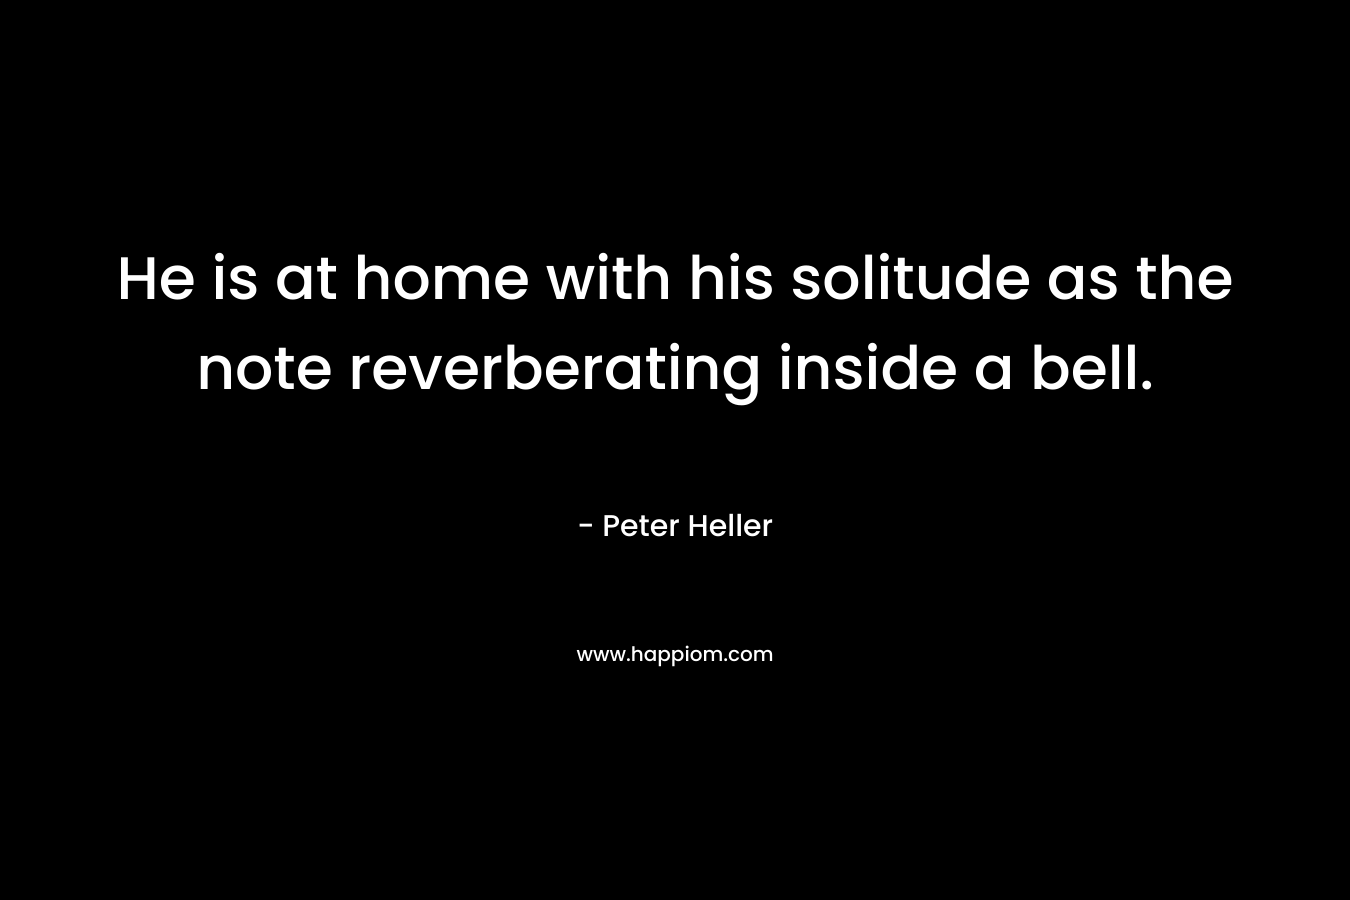 He is at home with his solitude as the note reverberating inside a bell. – Peter Heller